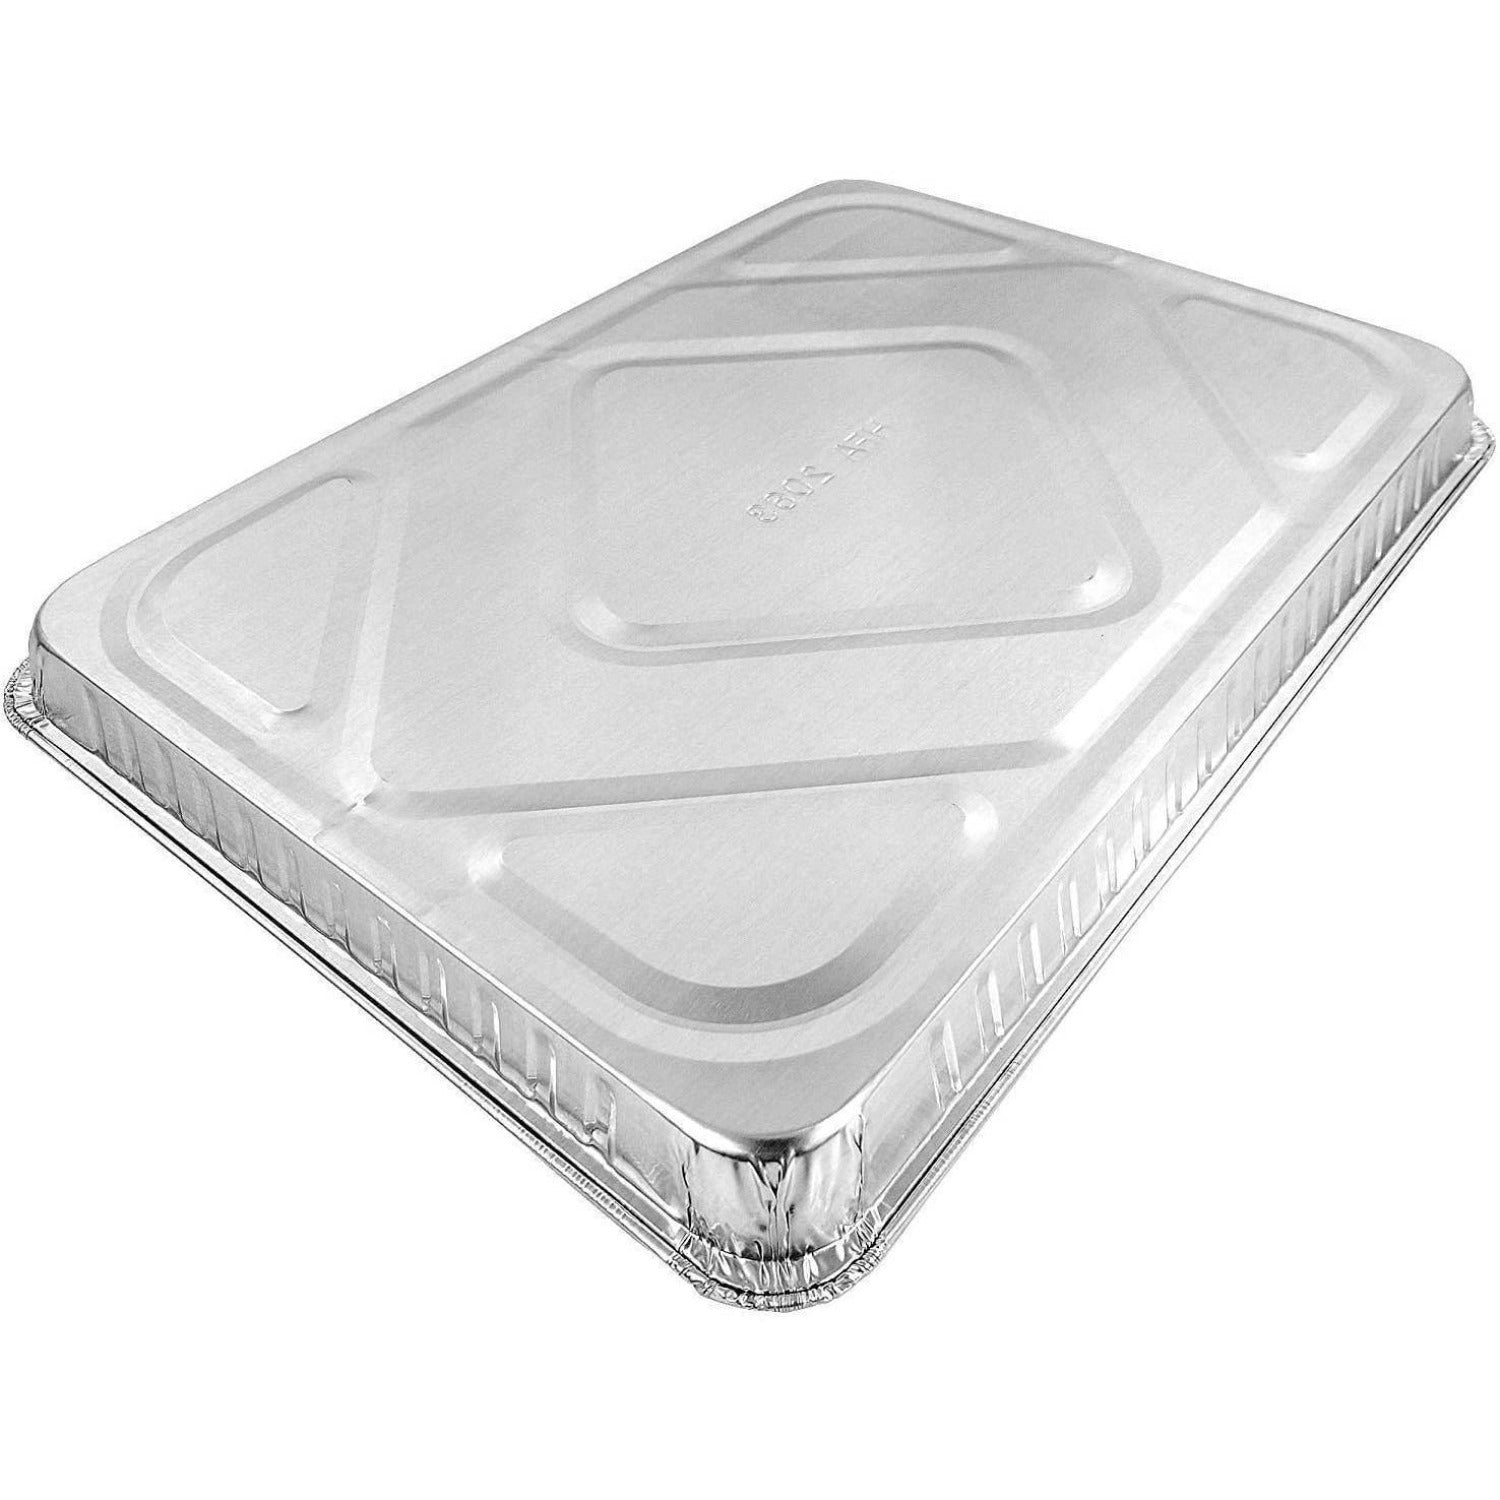 APPROVED VENDOR Disposable Paper Plate: White, Heavy-Wt, 9 in Disposable  Plate Size, 600 PK